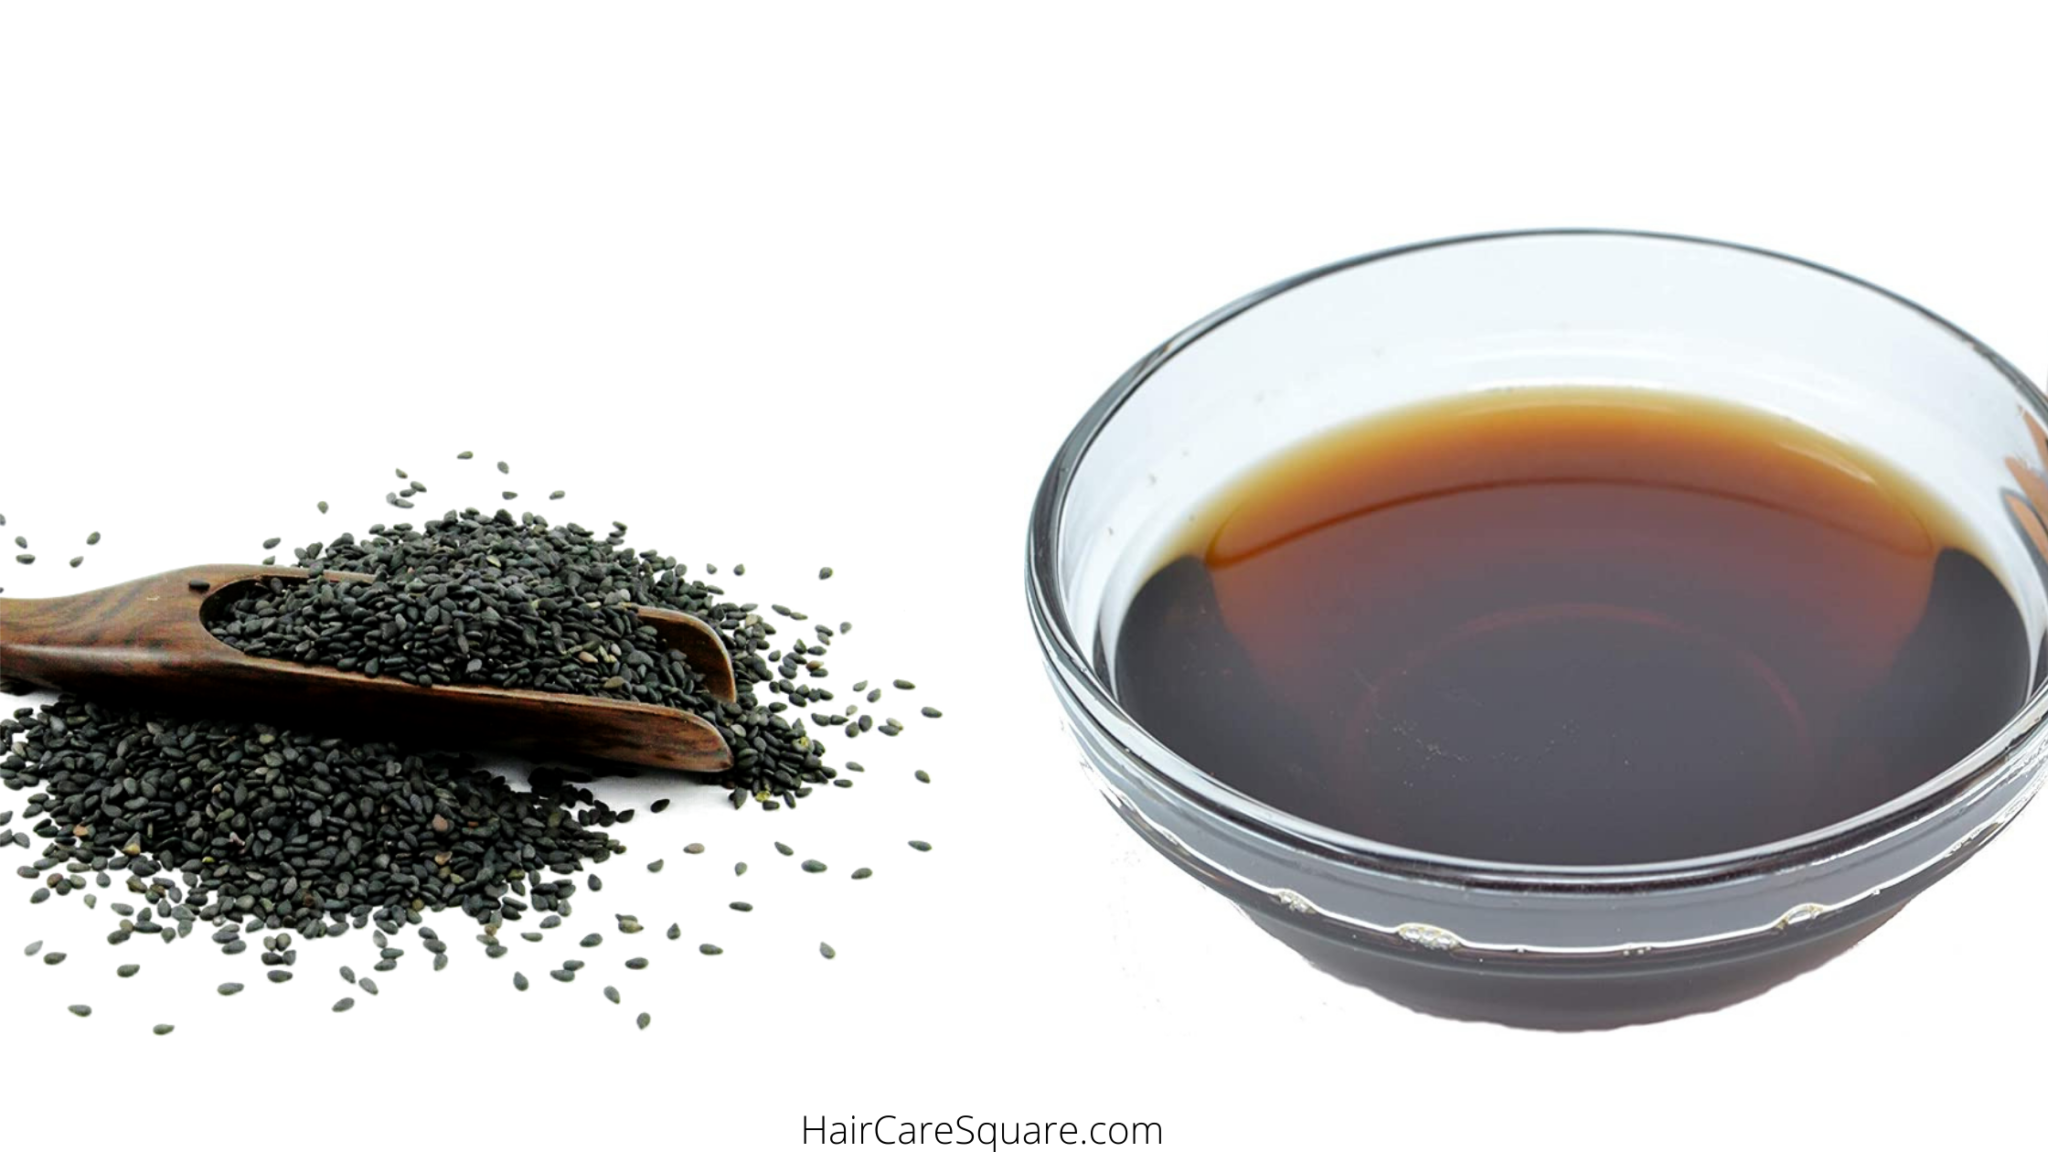 How To Use Blackseed Oil For Hair: Benefits Backed By Science